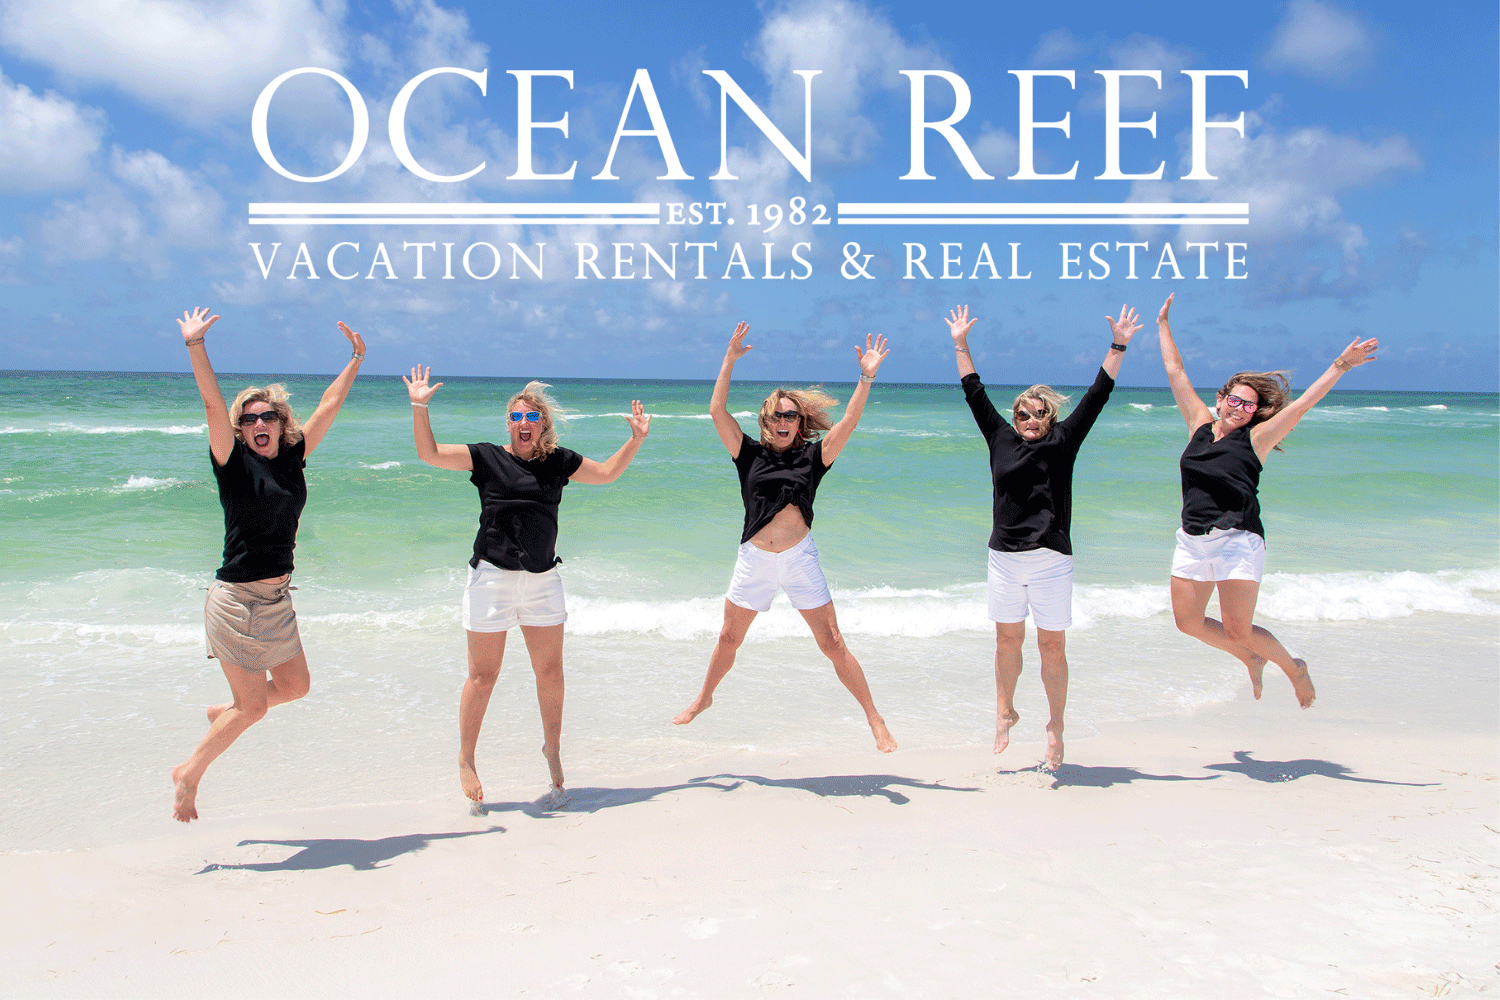 Vacation in Destin with Ocean Reef